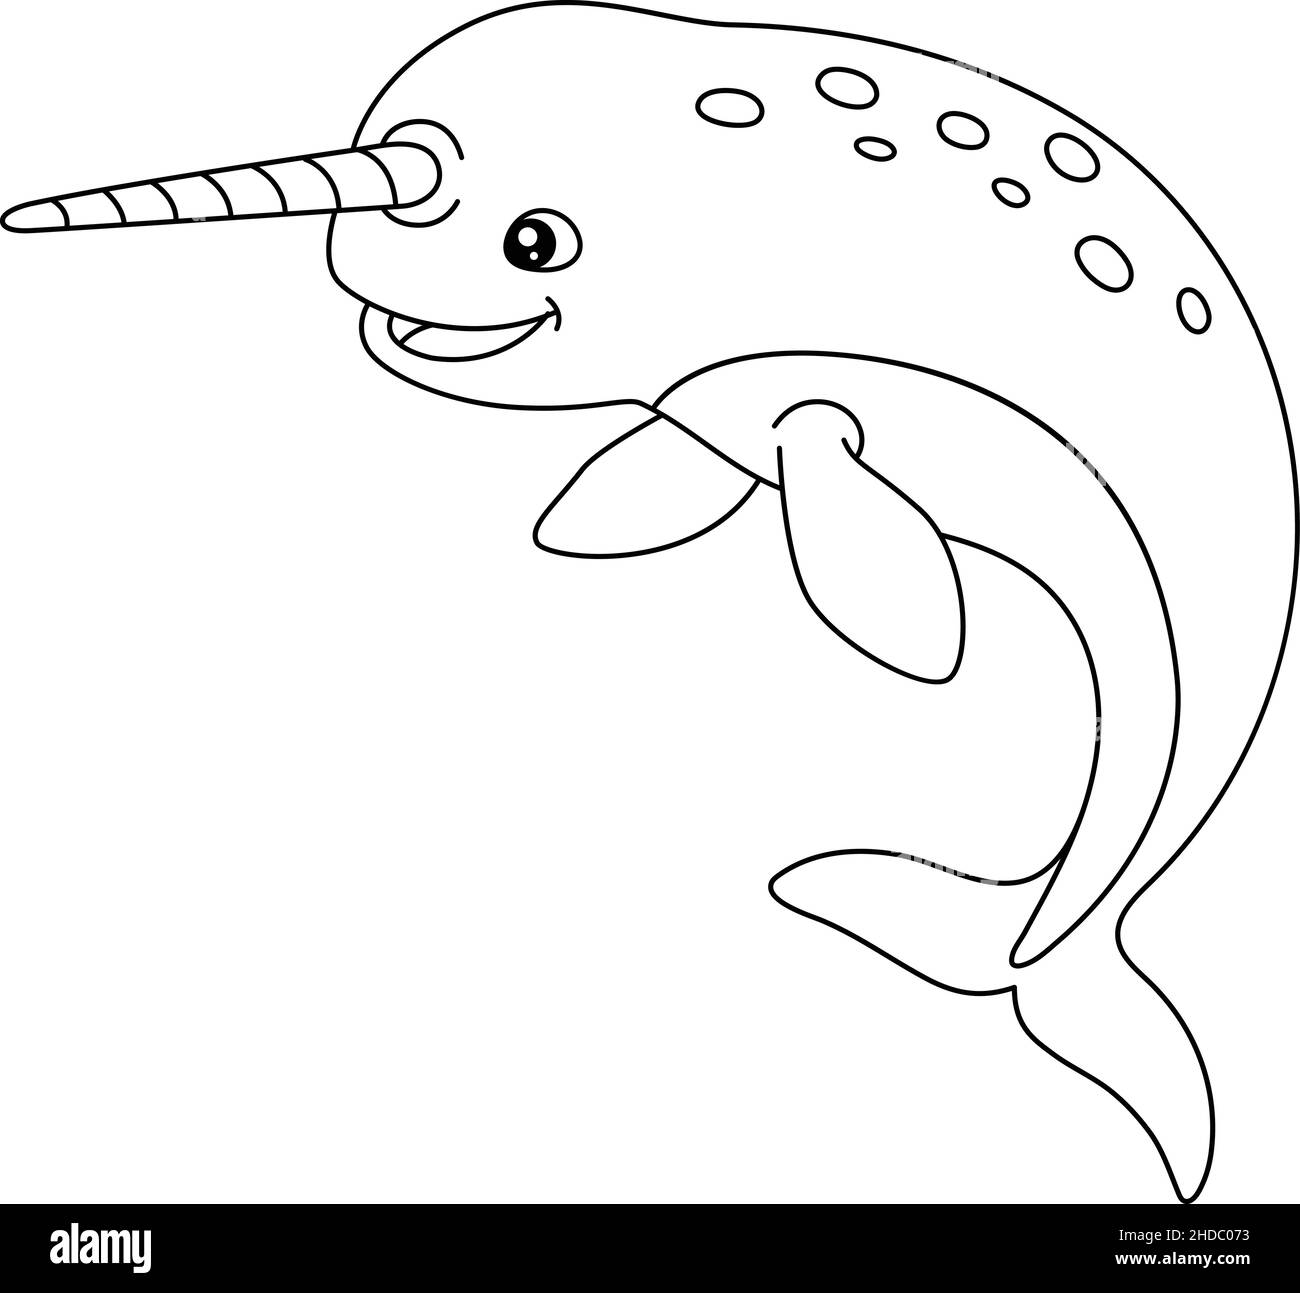 Narwhal Coloring Page Isolated for Kids Stock Vector